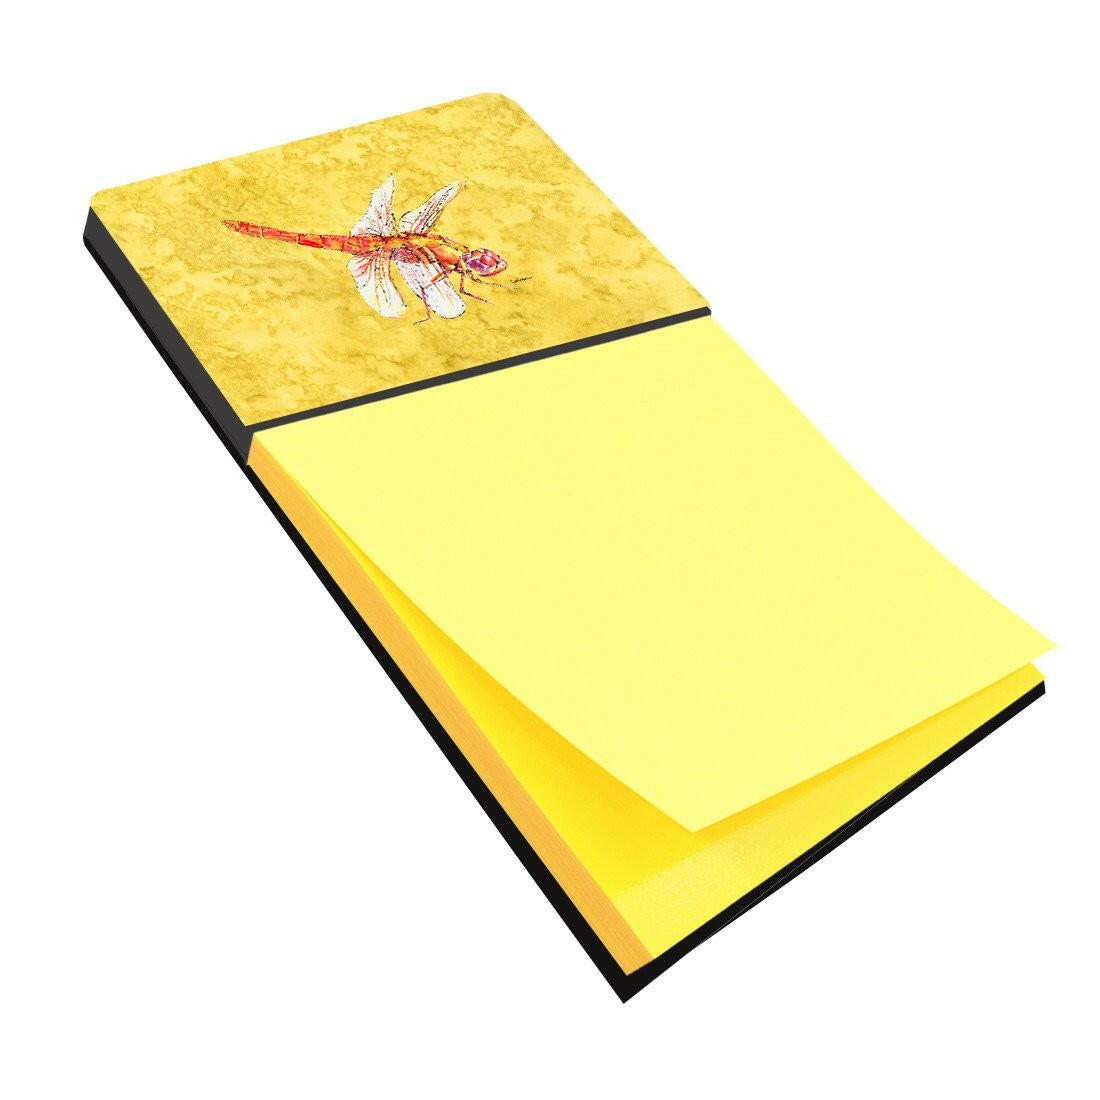 Dragonfly on Yellow Refiillable Sticky Note Holder or Postit Note Dispenser 8866SN by Caroline's Treasures